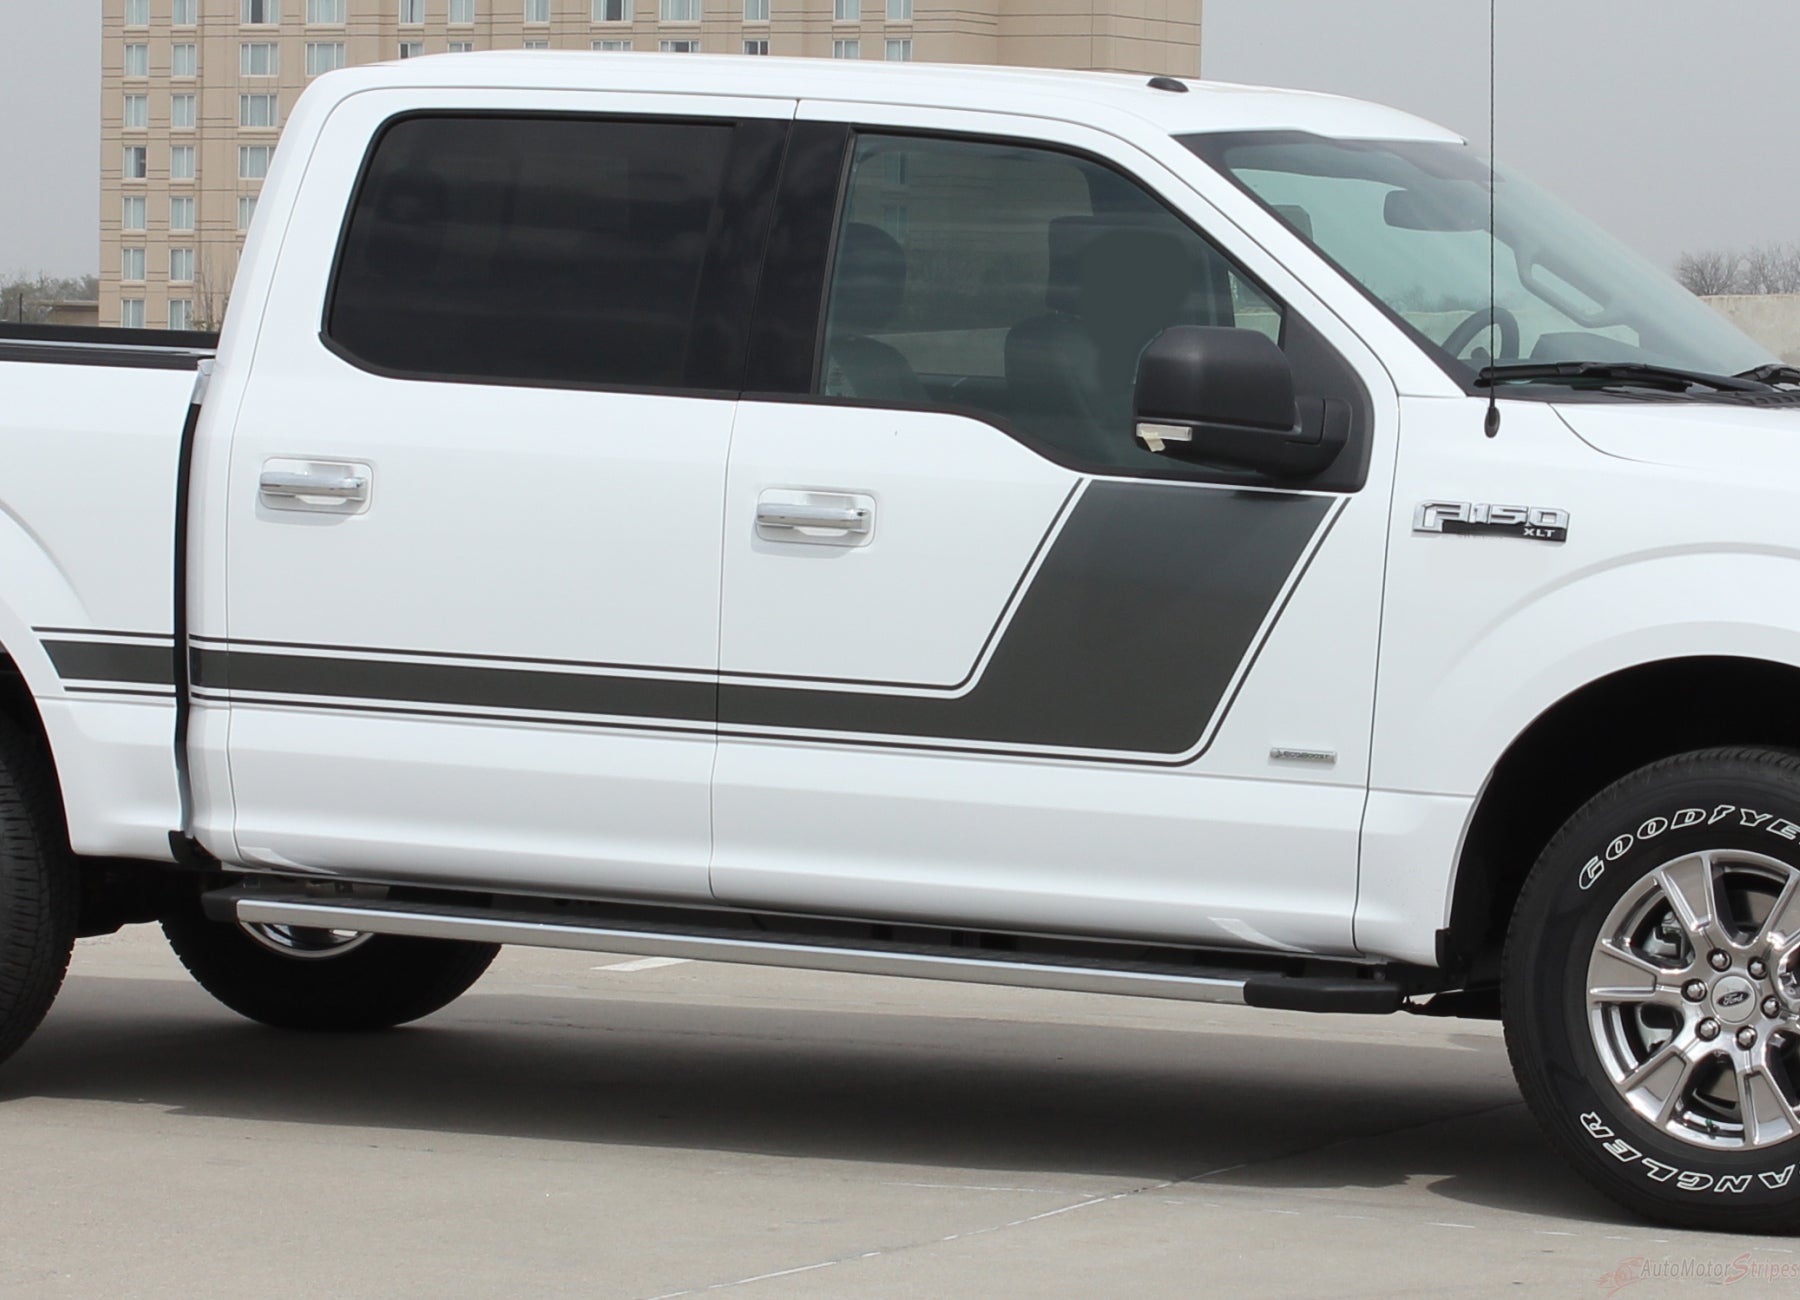 2014 Ford F 150 Color Chart